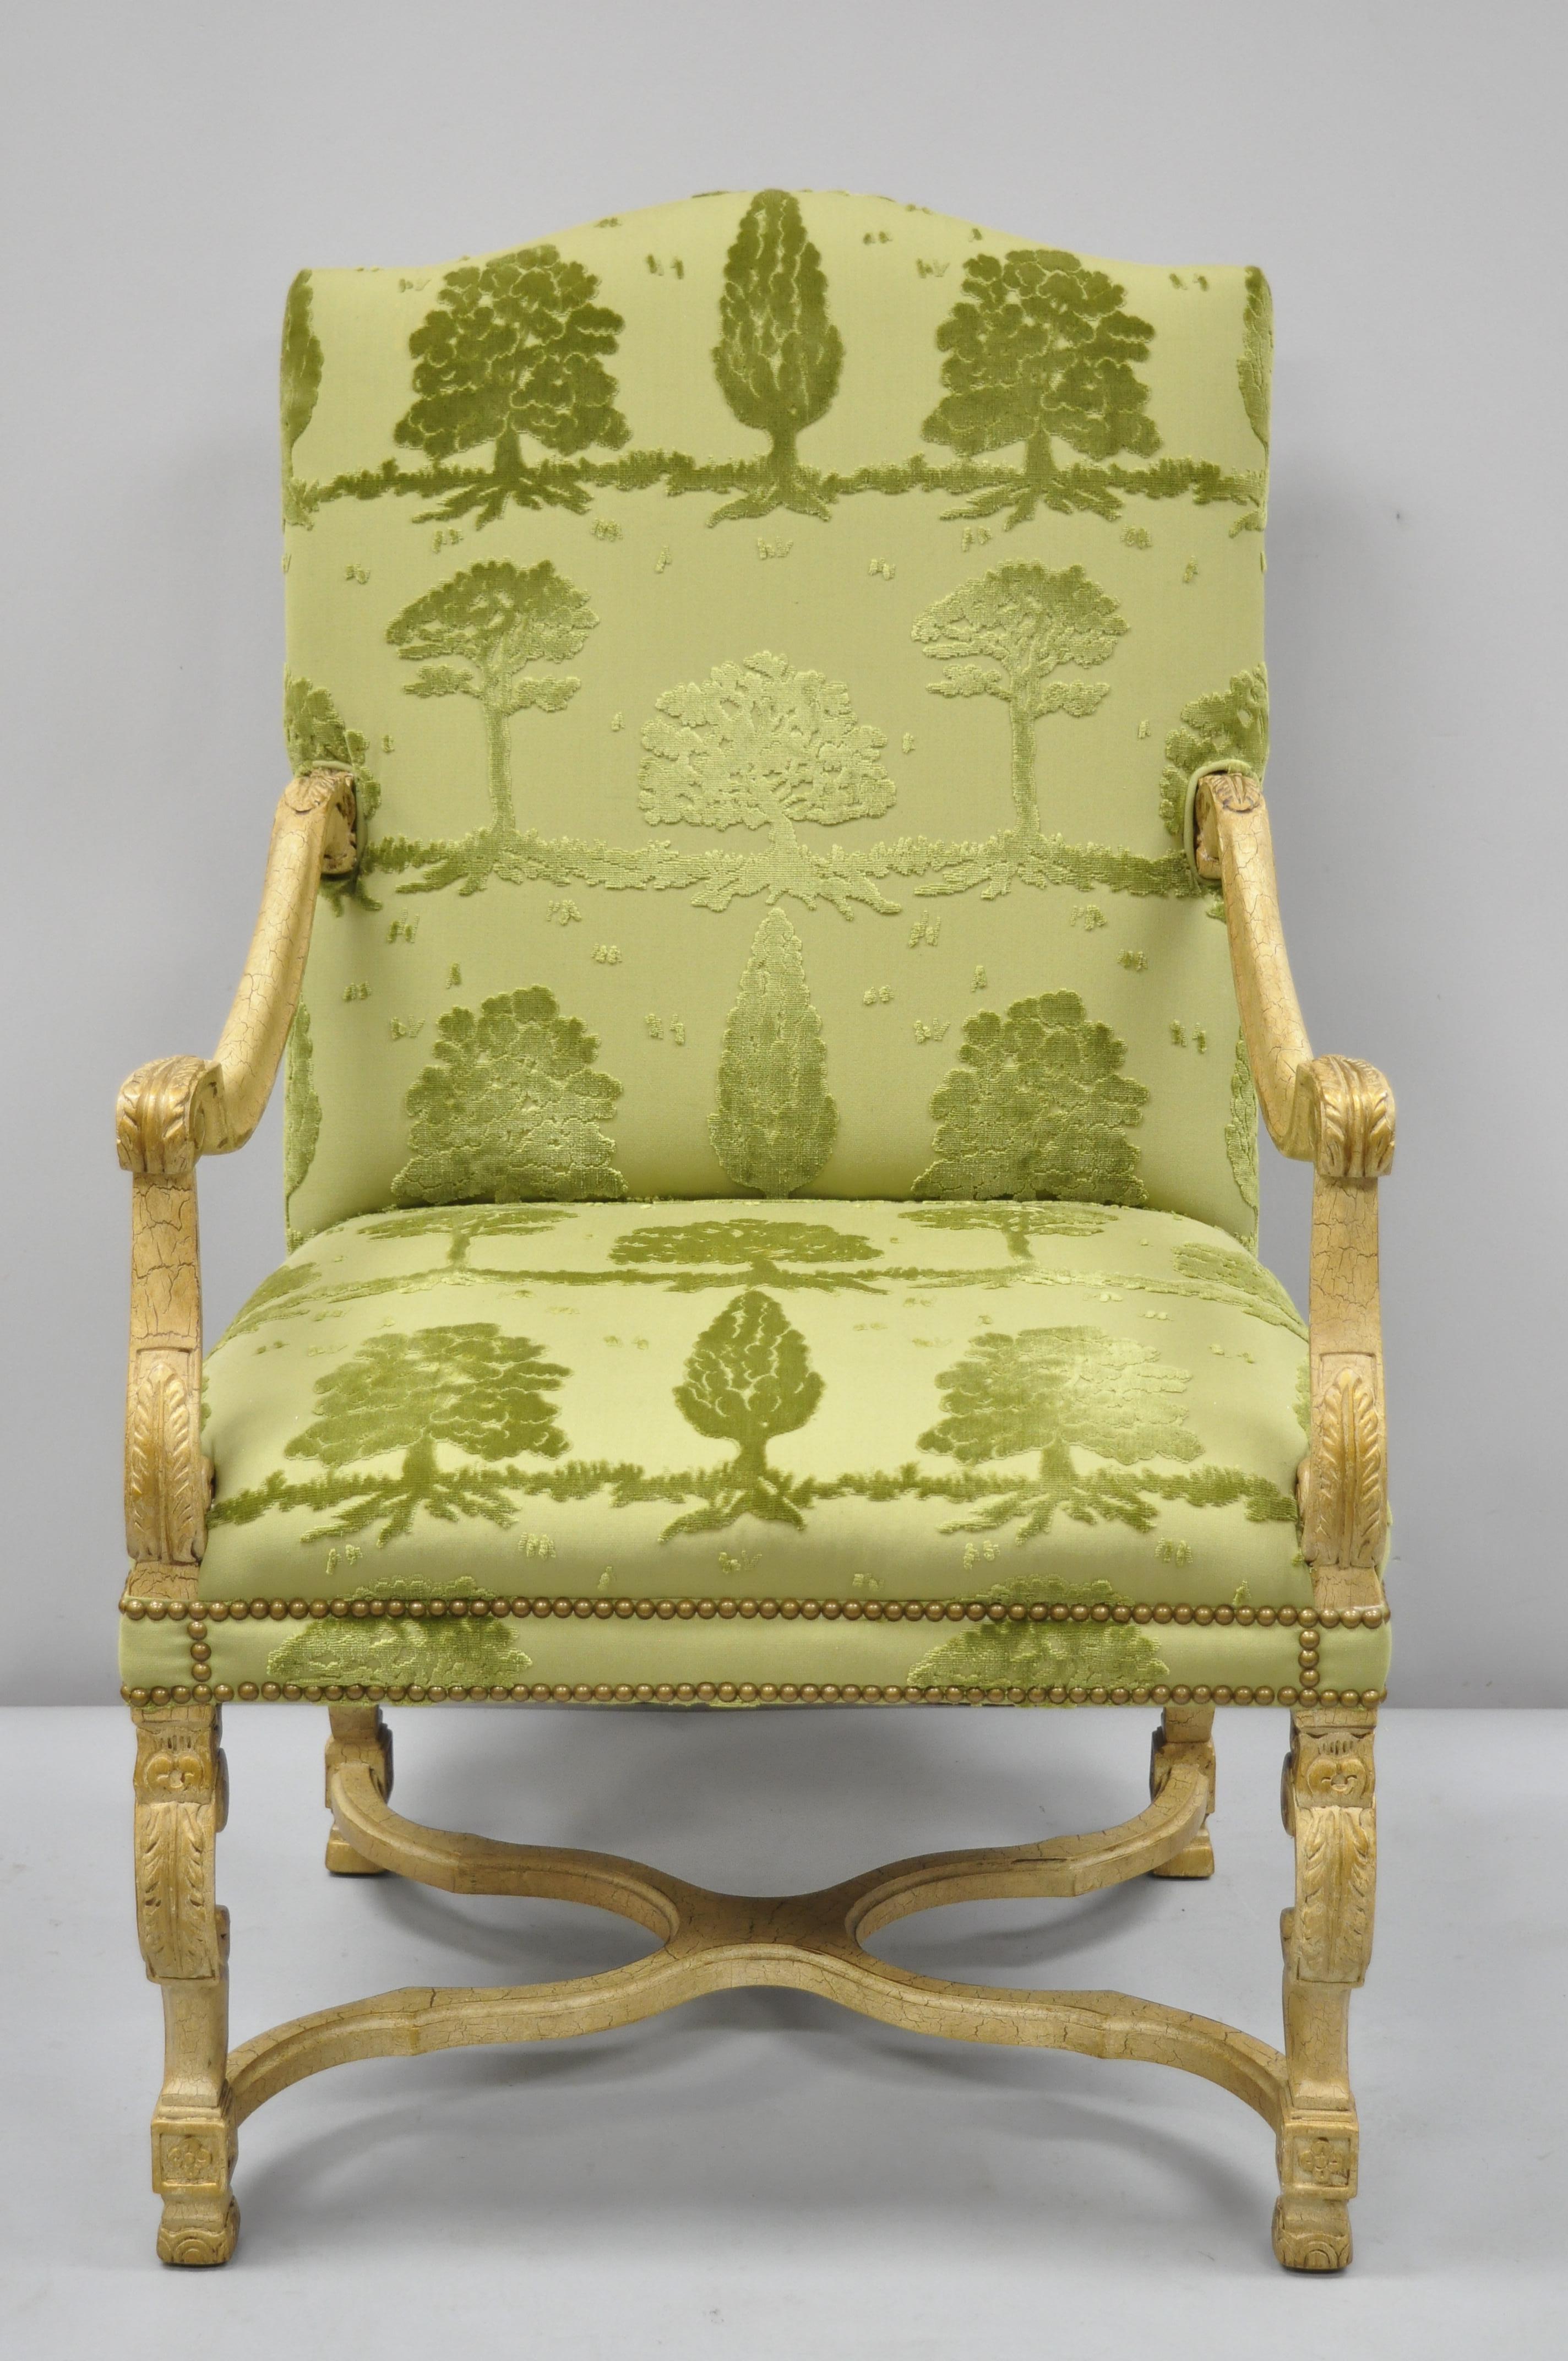 Sherrill green upholstered Italian baroque style tall back throne armchair. Item features original green fabric, solid wood construction, distressed finish, nicely carved details, original label, quality American craftsmanship, late 20th century.